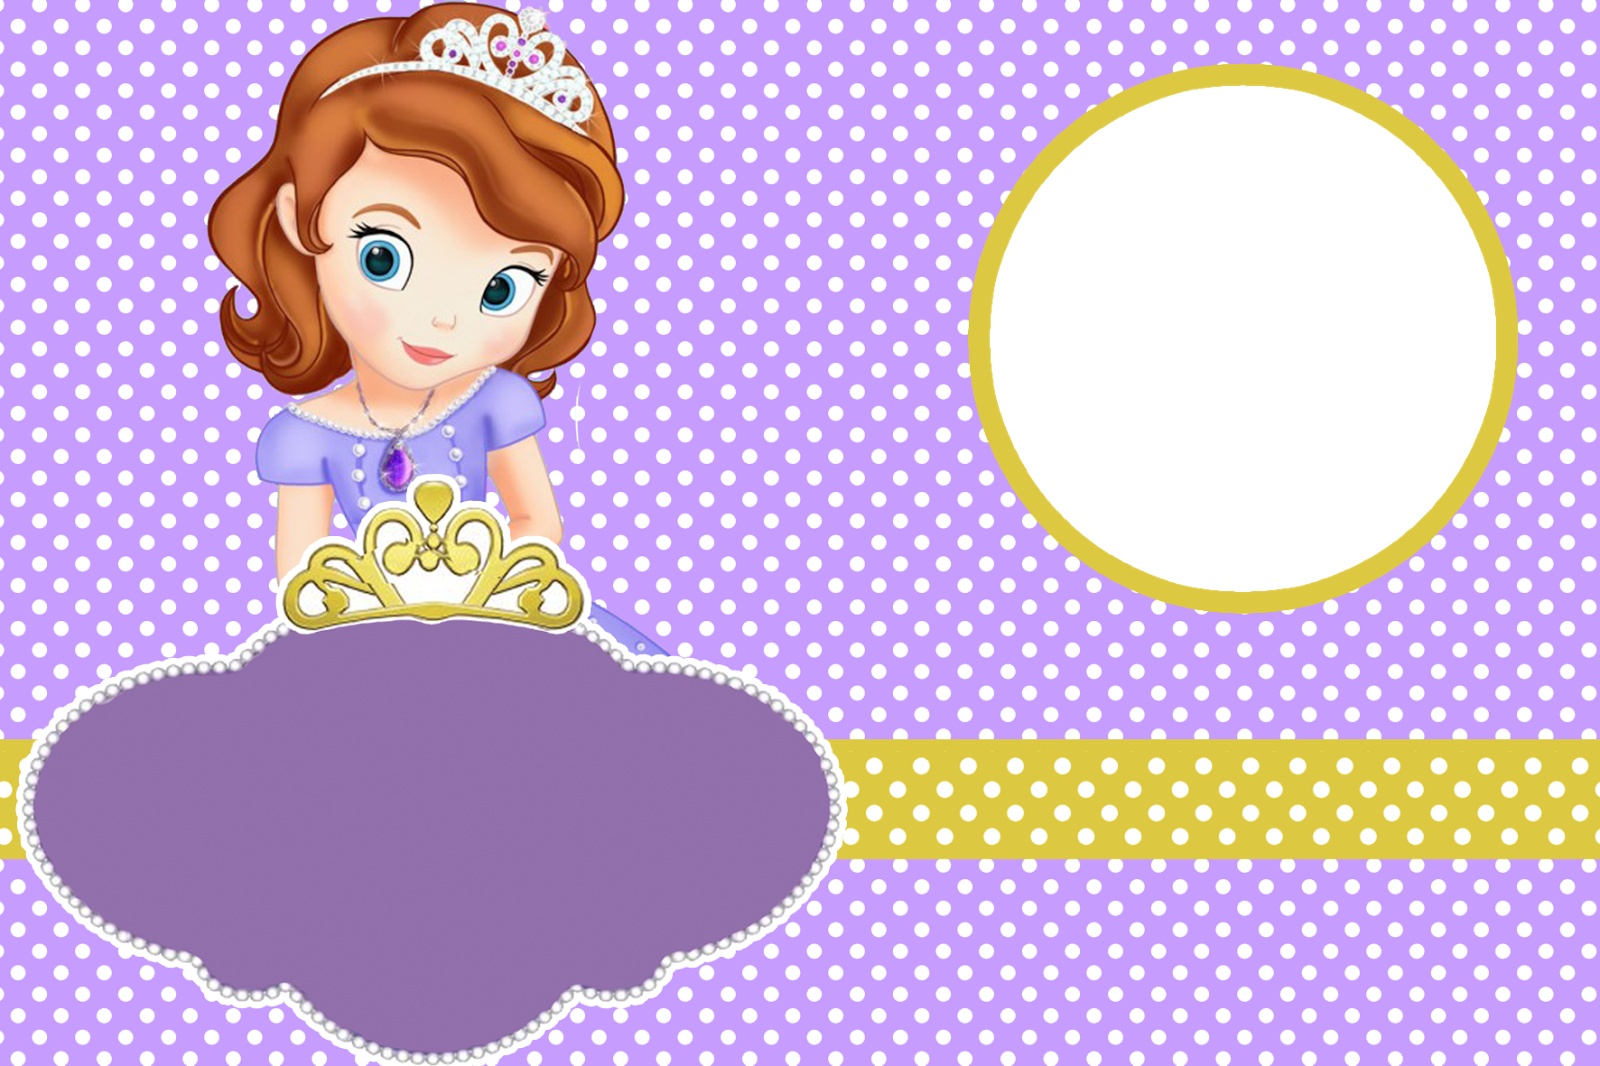 Sofia The First - Gray Circle Transparent Background , HD Wallpaper & Backgrounds